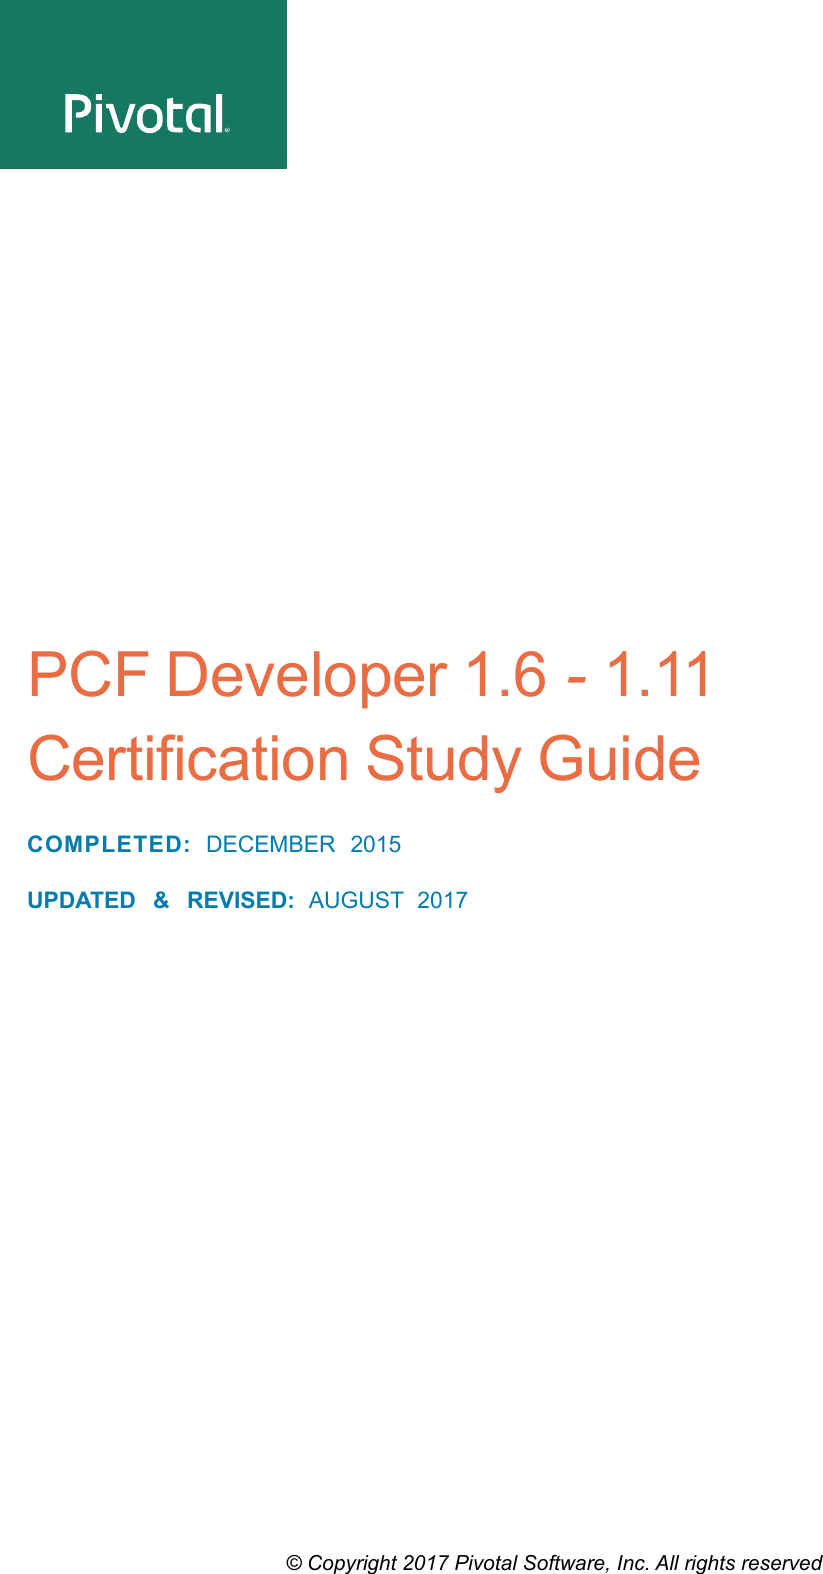 Page 1 of 9 - Big Data Vendor PCF-Dev1.6-1.11-Certification-Study-Guide